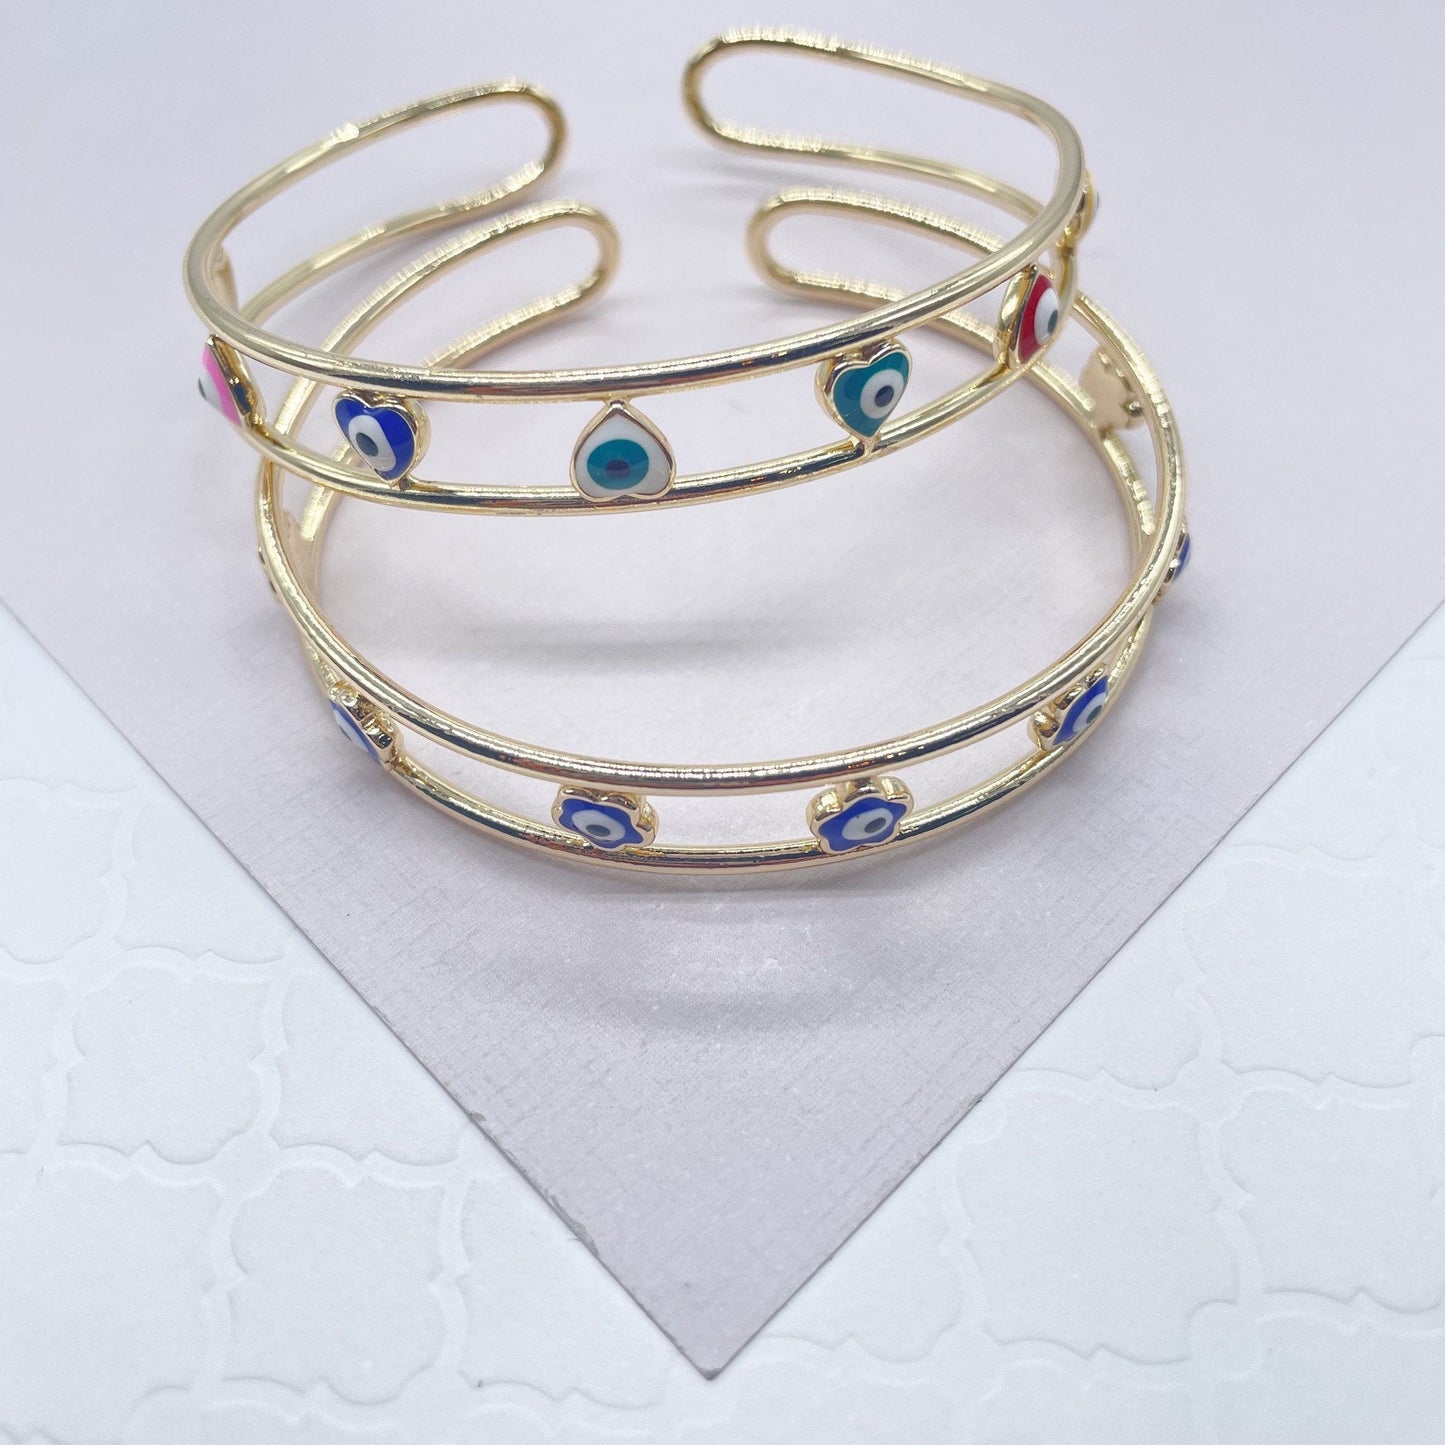 18k Gold Layered Colorful Evil Eye Cuff Bracelets Featuring Flower, Heart or